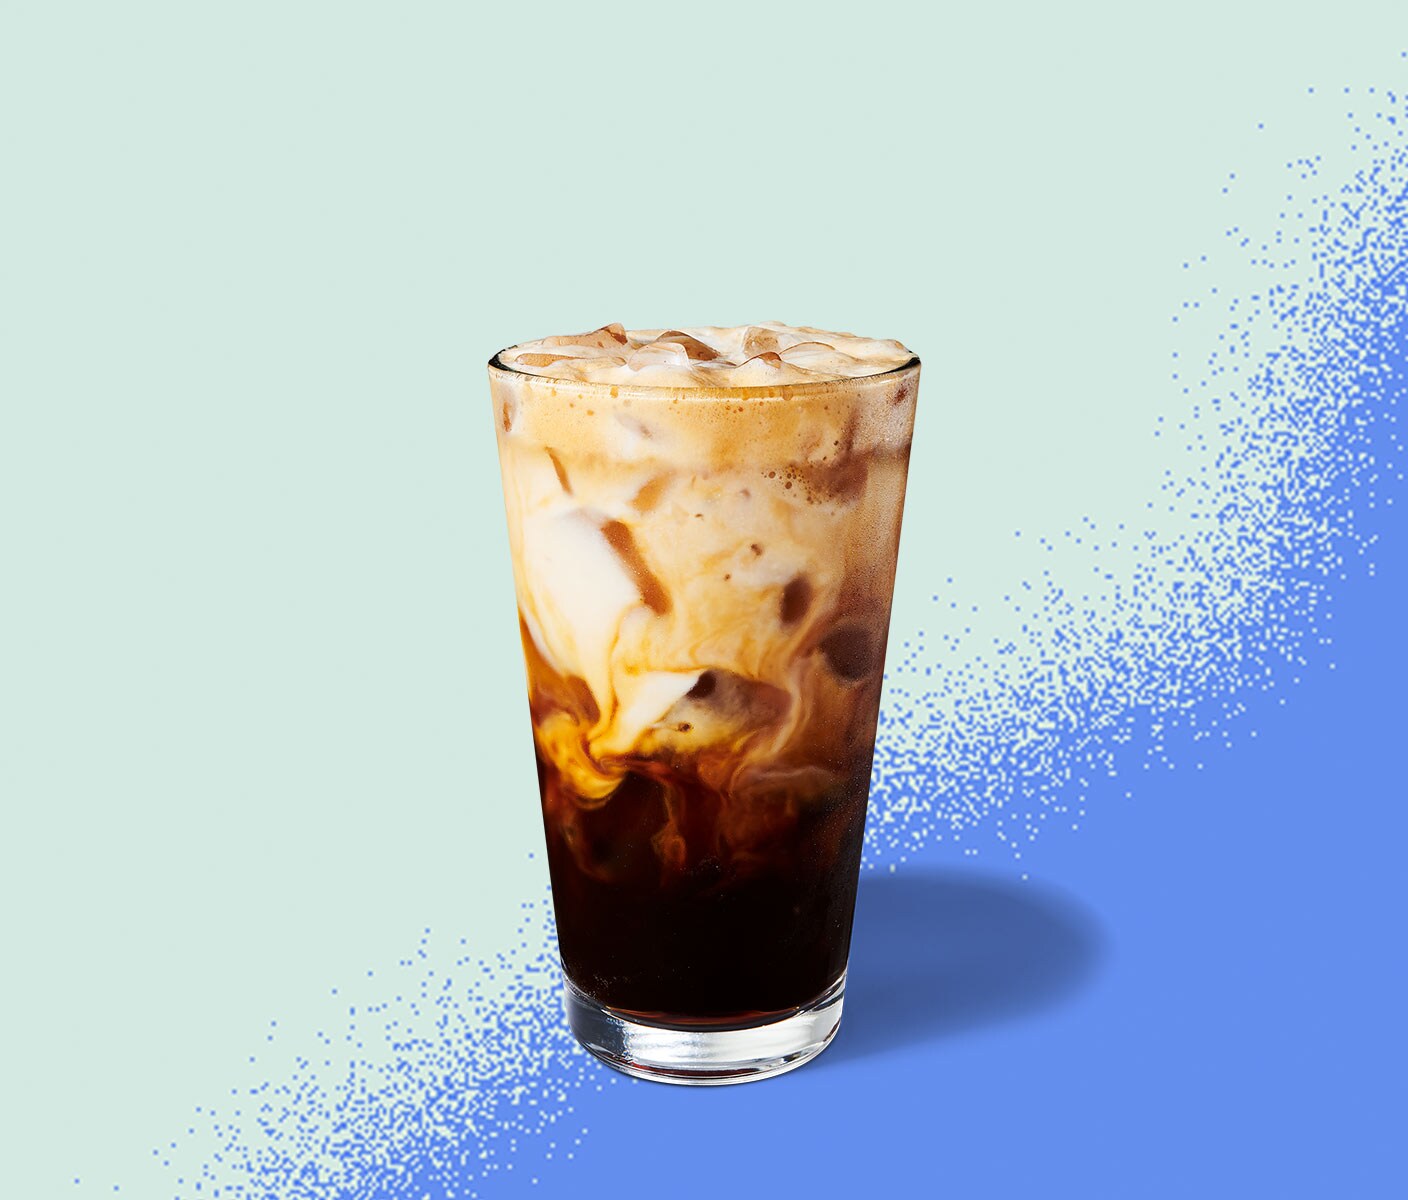 Iced espresso drink with creamy marbling in a tall glass.